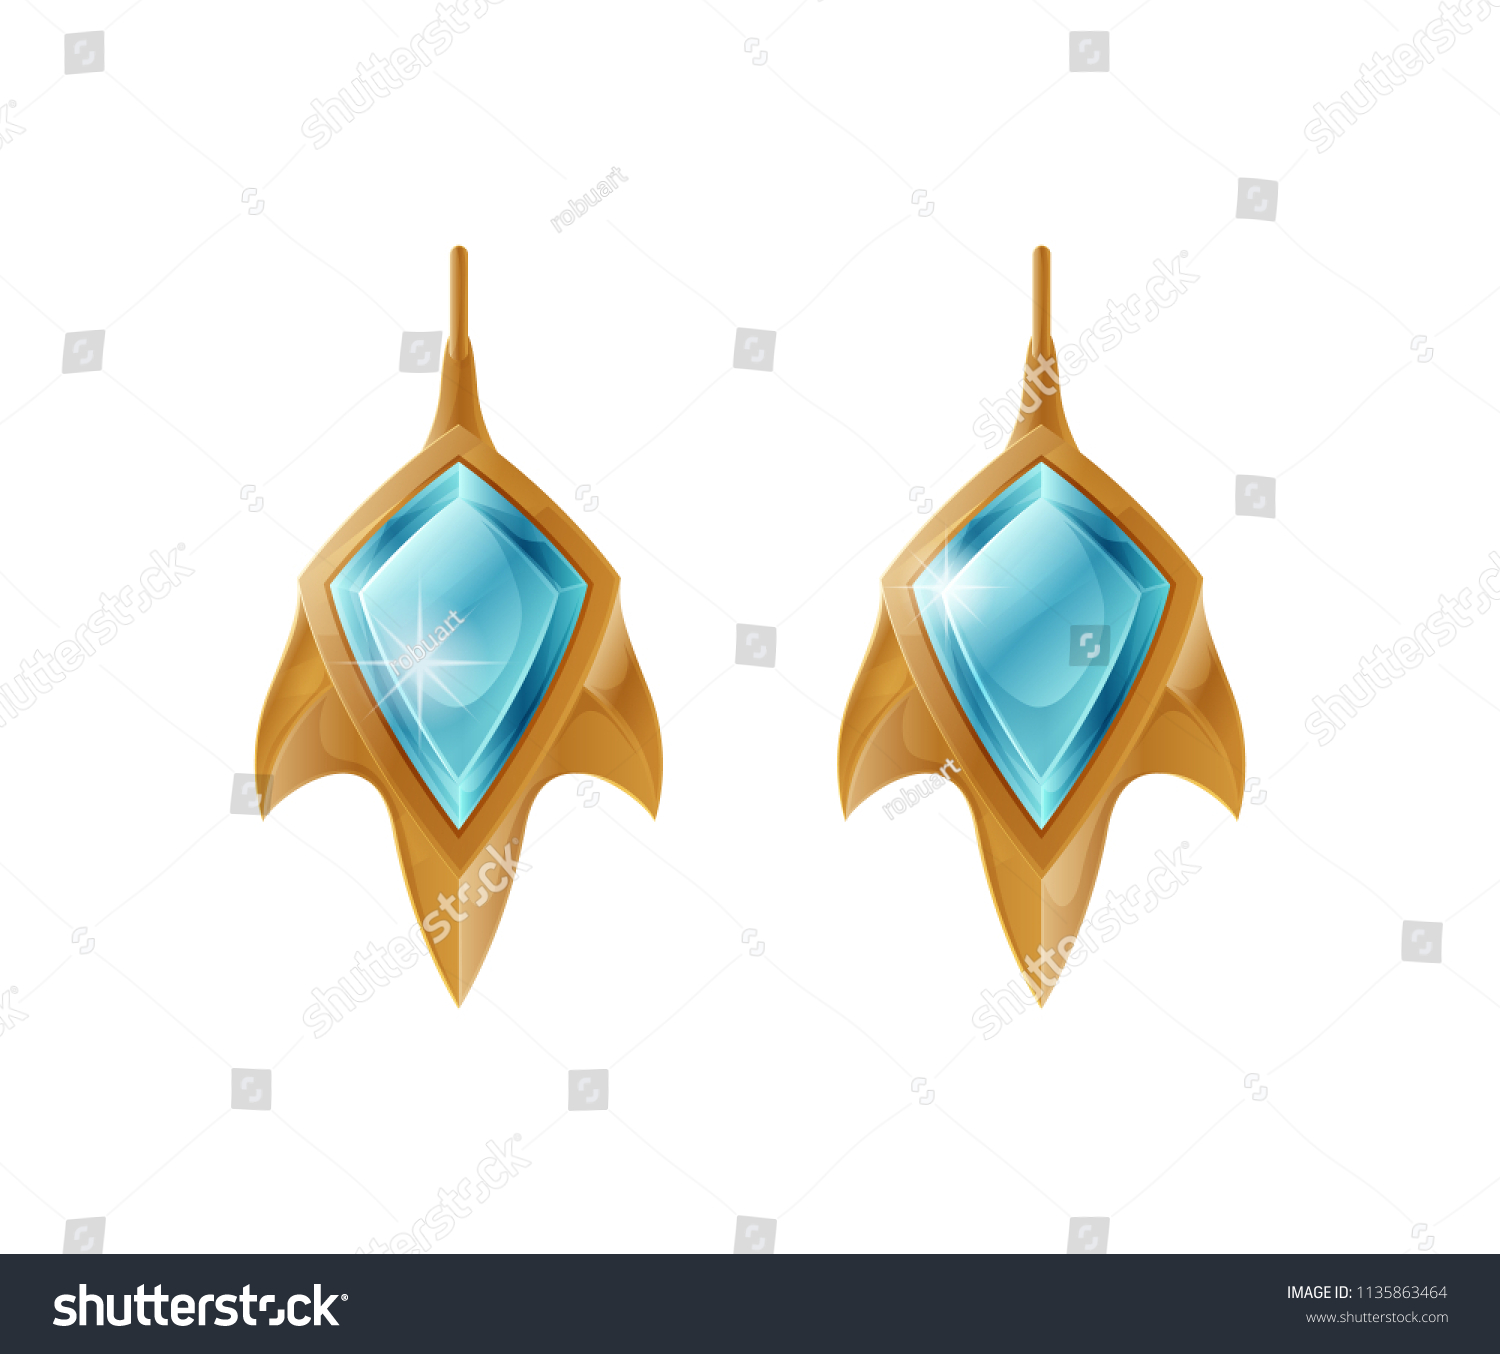 SVG of Golden earrings leaf shape isolated on white vector illustration female stylish accessories with blue stones, golden or platinum decoration for ears svg